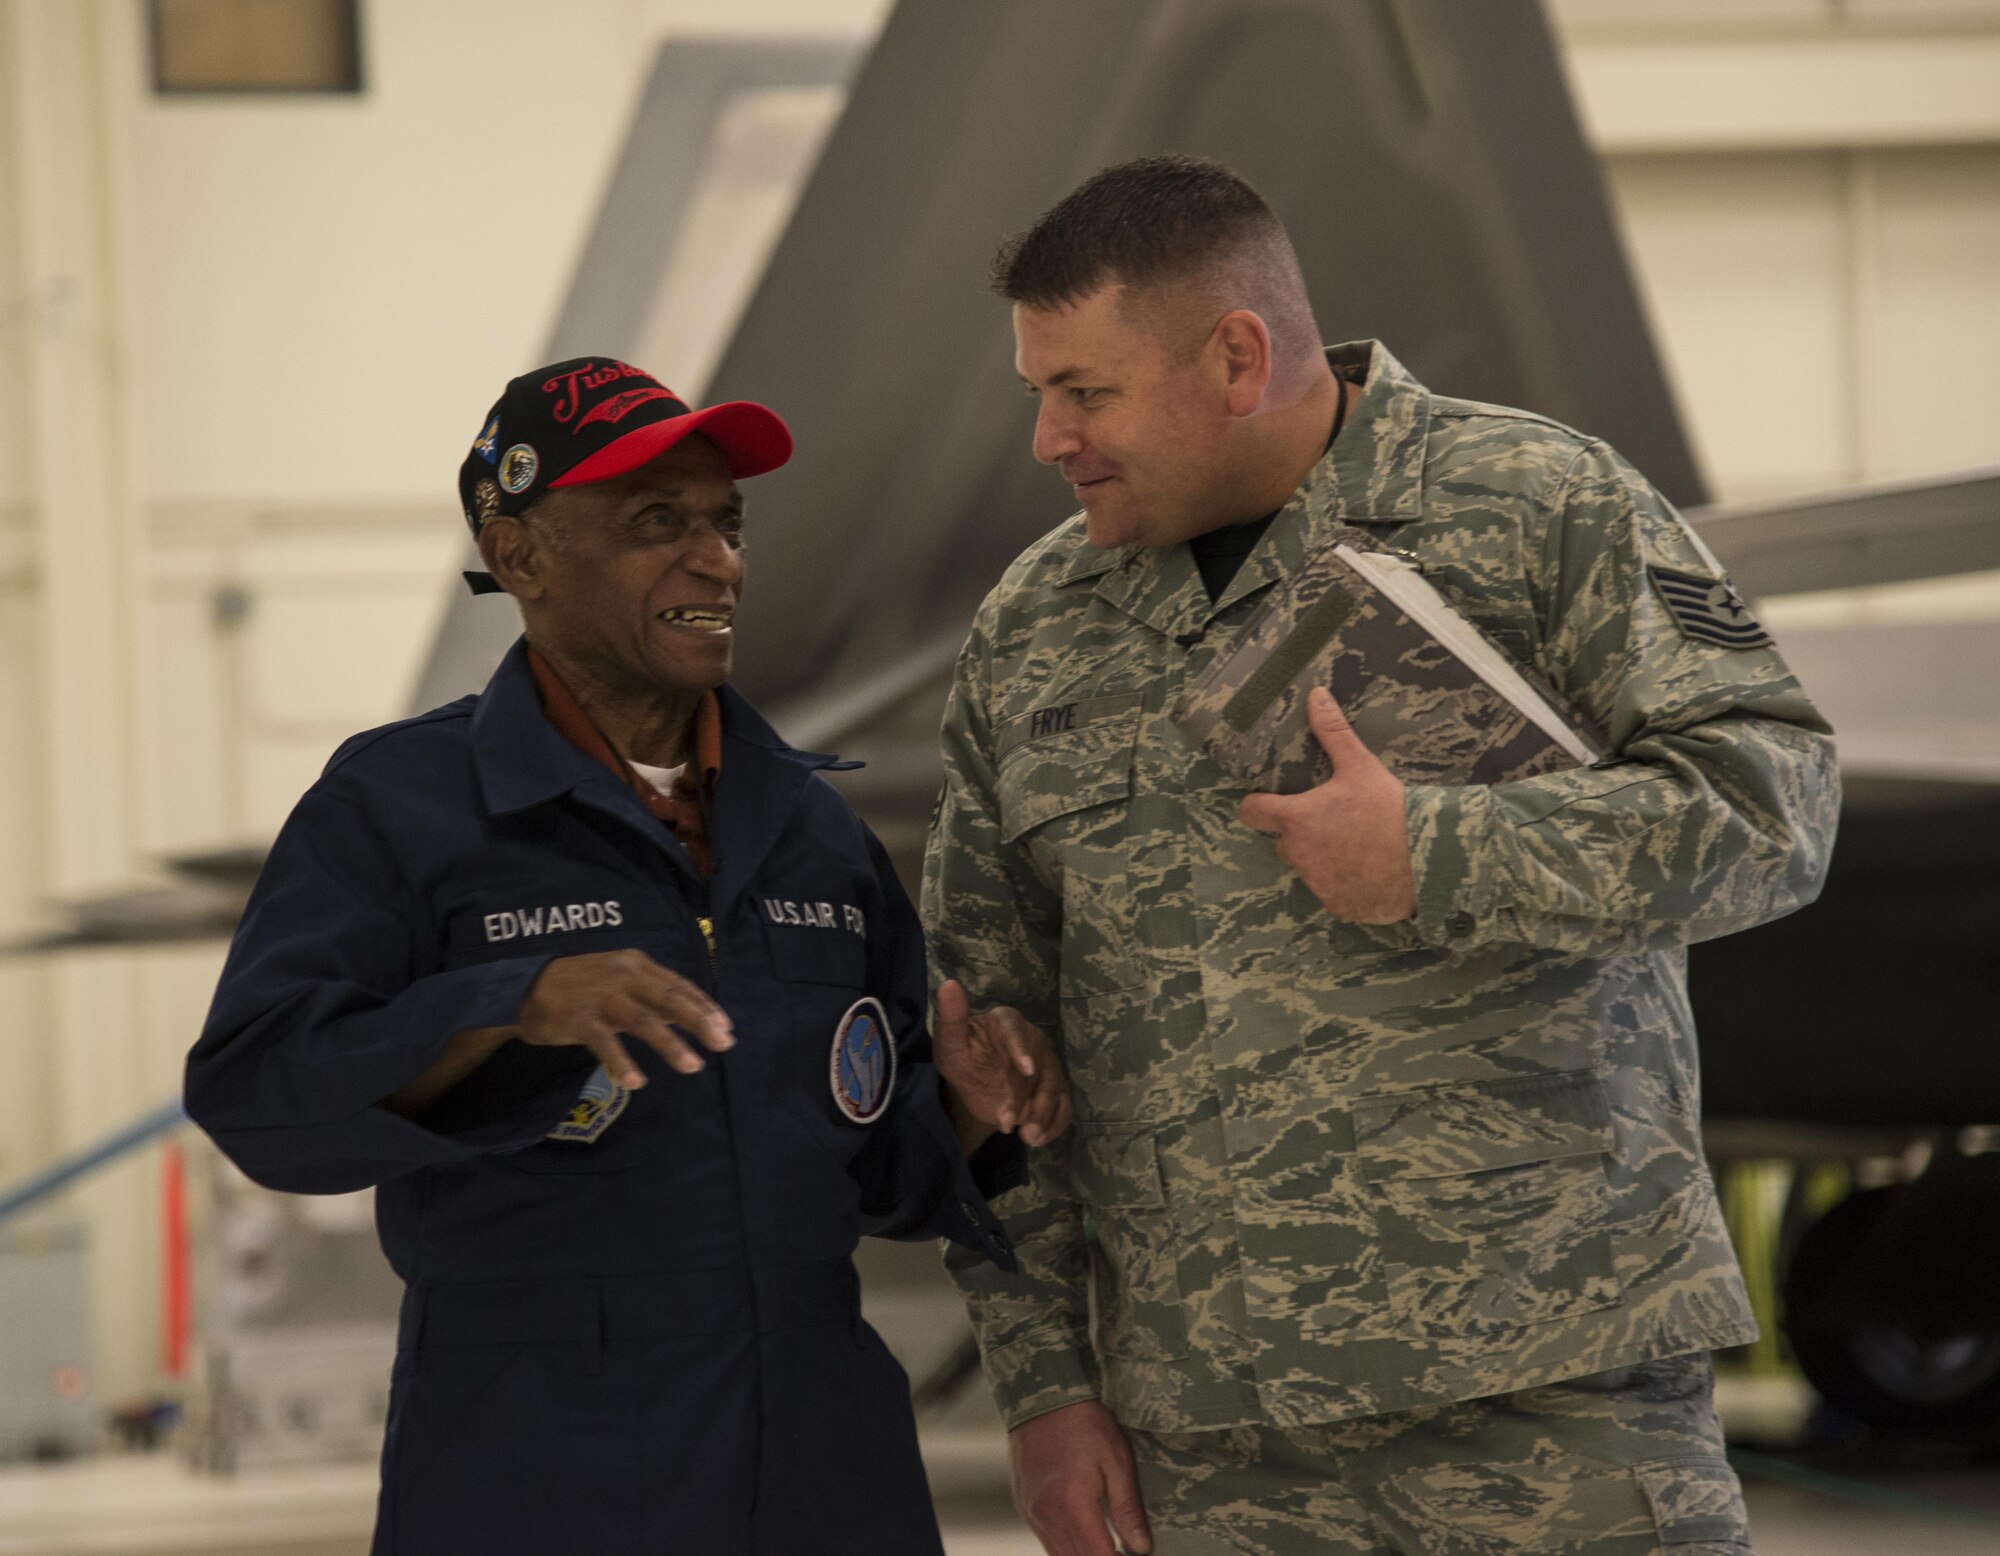 Army Air Corps Staff Sgt. Leslie Edwards, the last known living Tuskegee Airman of the the 477th Bombardment Group, meets U.S. Air Force Tech. Sgt. Jeremiah Frye, 477th Fighter Group quality assurance inspector, at Joint Base Elmendorf-Richardson, Alaska, Oct. 14, 2017. In 2007, the 477th Bombardment Group became the 477th Fighter Group, bringing with it the legacy of Tuskegee Airmen to Alaska. (U.S. Air Force photo by Senior Airman Curt Beach)